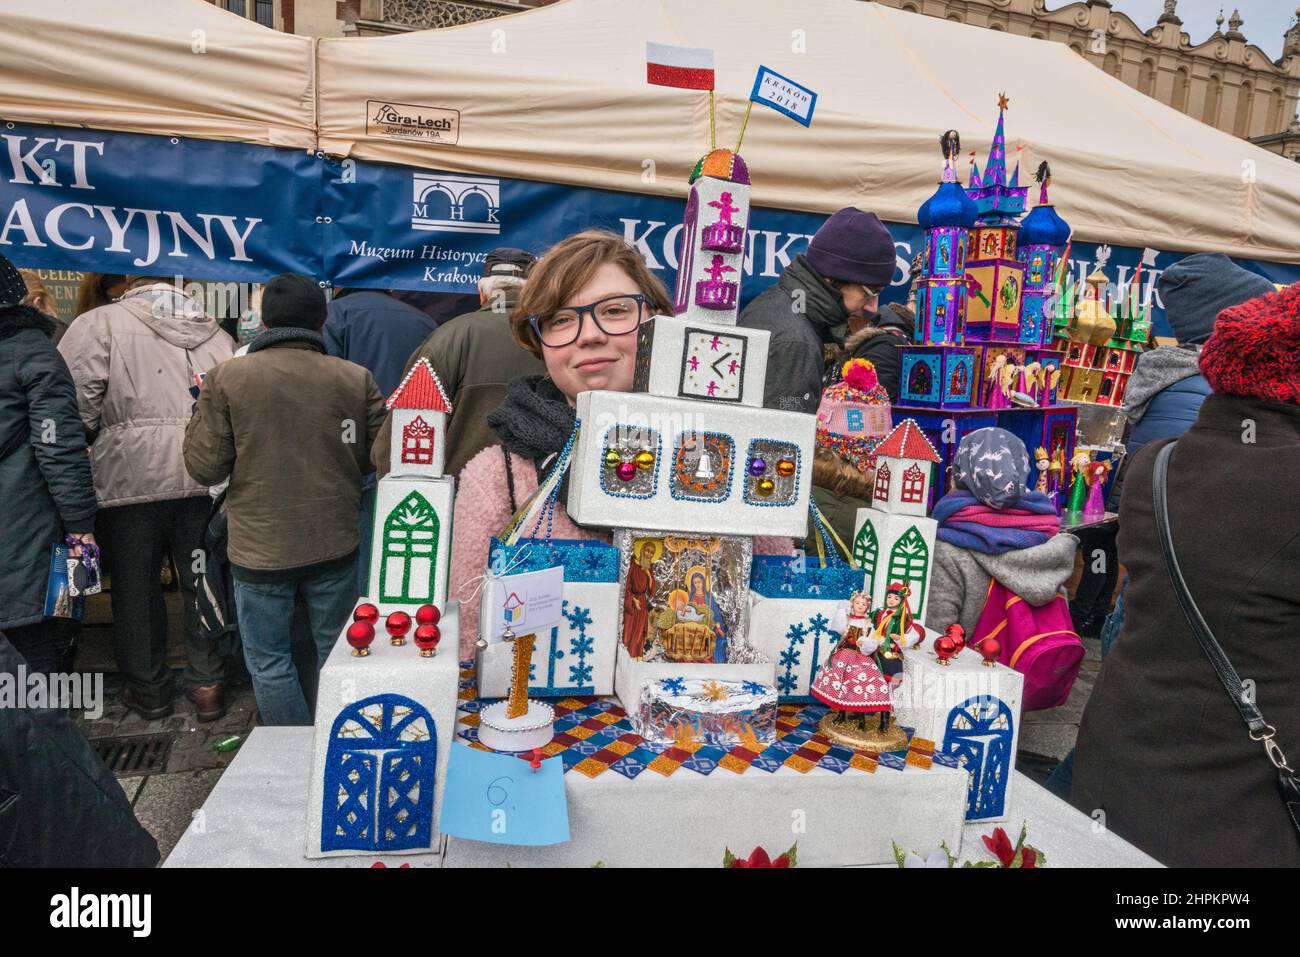 Girl carrying Szopka nativity scene to display during annual contest in December, event included in UNESCO Cultural Heritage list, at Adam Mickiewicz monument, Main Market Square, Kraków, Poland Stock Photo